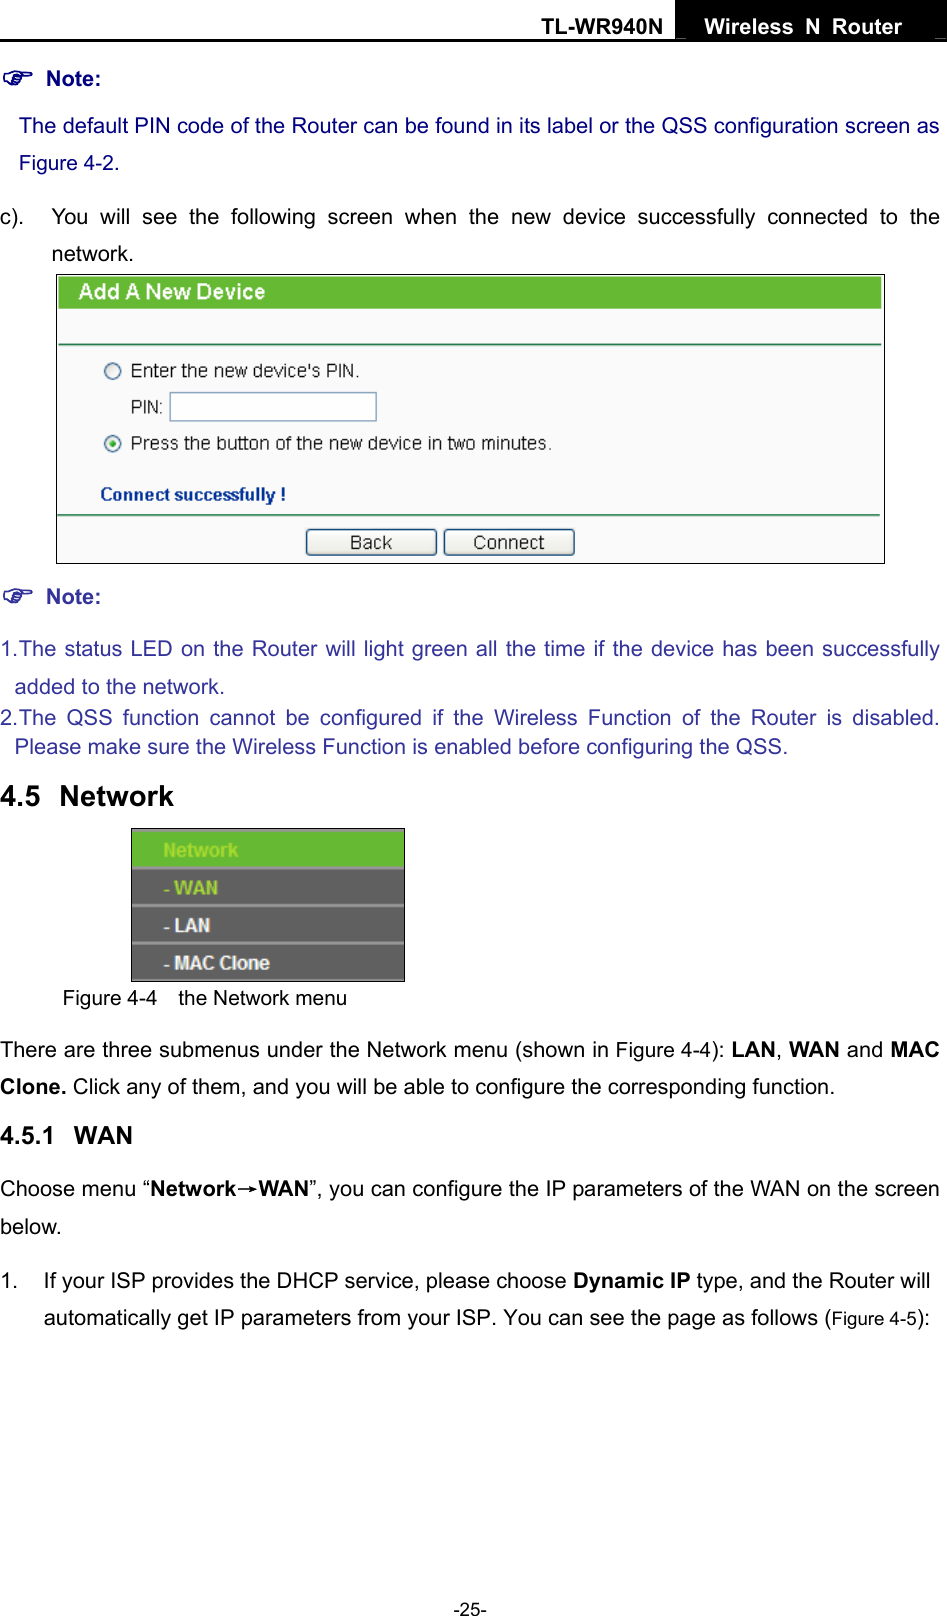 TL-WR940N  Wireless N Router   ) Note: The default PIN code of the Router can be found in its label or the QSS configuration screen as Figure 4-2. c).  You will see the following screen when the new device successfully connected to the network.  ) Note: 1. The status LED on the Router will light green all the time if the device has been successfully added to the network. 2. The QSS function cannot be configured if the Wireless Function of the Router is disabled. Please make sure the Wireless Function is enabled before configuring the QSS. 4.5  Network  Figure 4-4  the Network menu There are three submenus under the Network menu (shown in Figure 4-4): LAN, WAN and MAC Clone. Click any of them, and you will be able to configure the corresponding function.   4.5.1  WAN Choose menu “Network→WAN”, you can configure the IP parameters of the WAN on the screen below. 1.  If your ISP provides the DHCP service, please choose Dynamic IP type, and the Router will automatically get IP parameters from your ISP. You can see the page as follows (Figure 4-5): -25- 